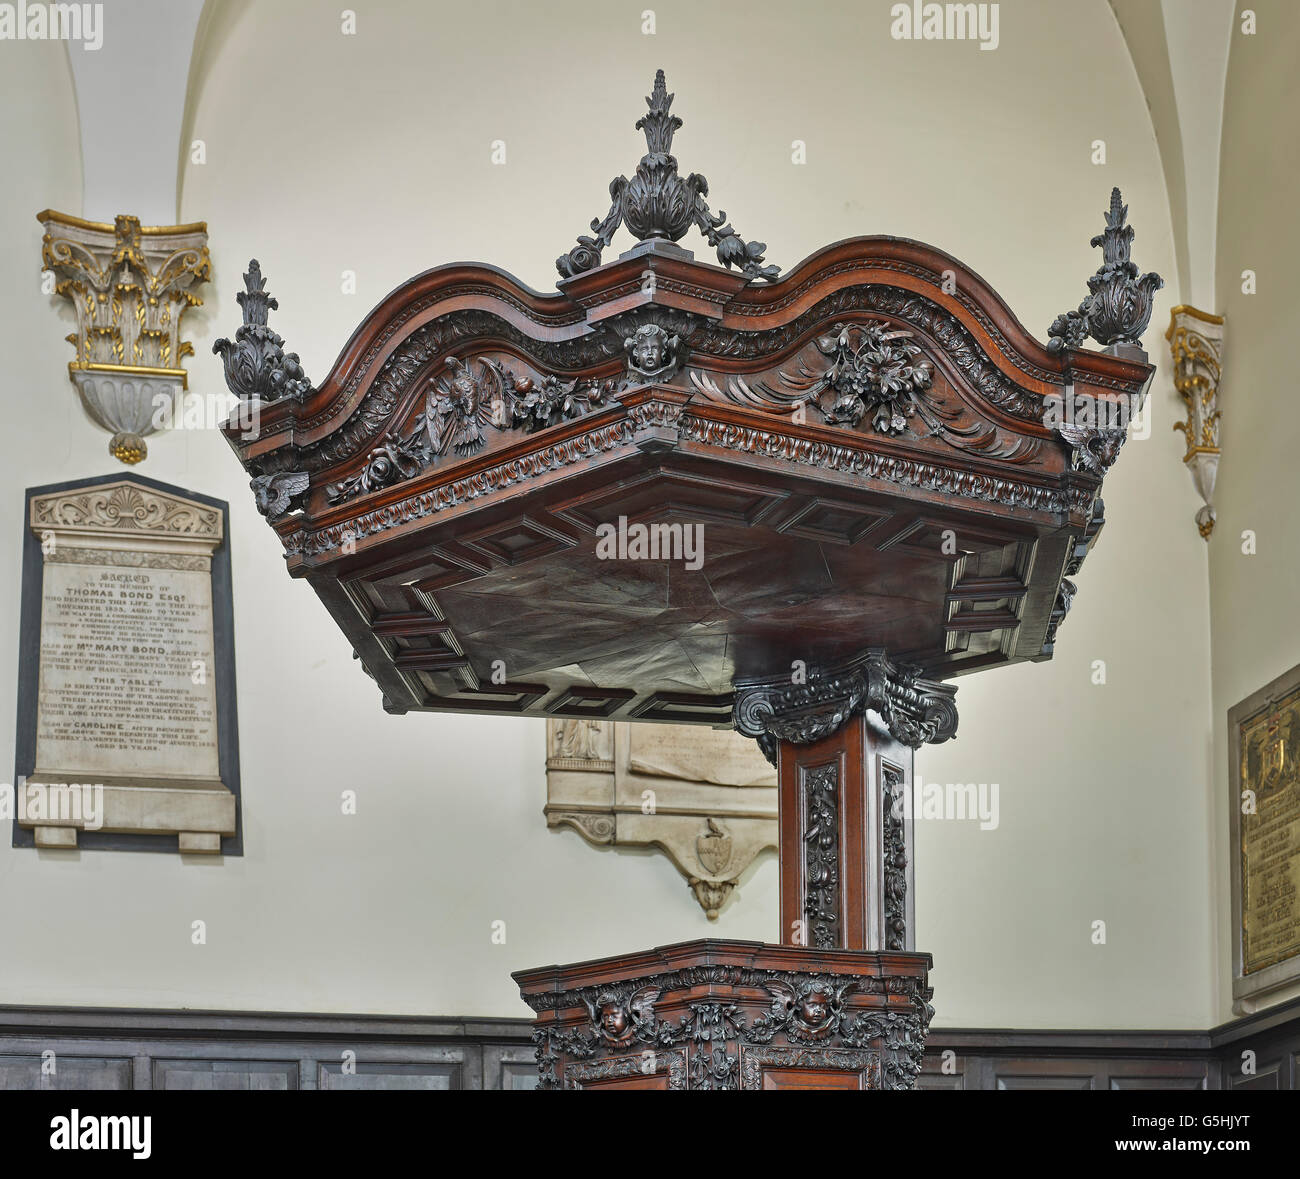 St Martin within Ludgate, church in the City of London, pulpit tester Stock Photo